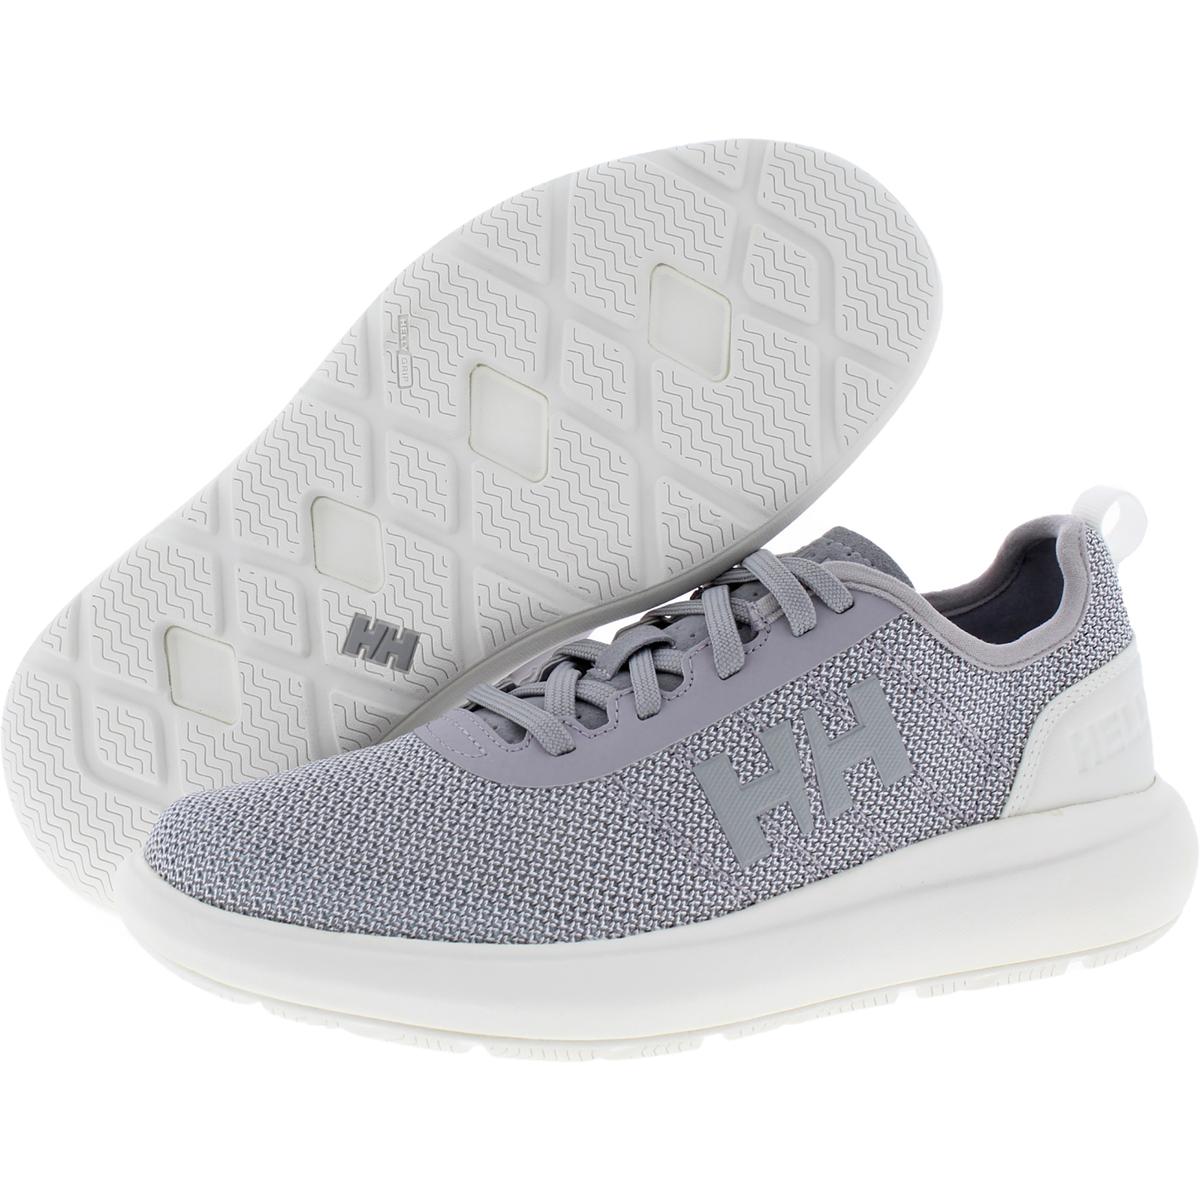 Helly Hansen Womens Spindrift Fitness Performance Sneakers Shoes BHFO ...